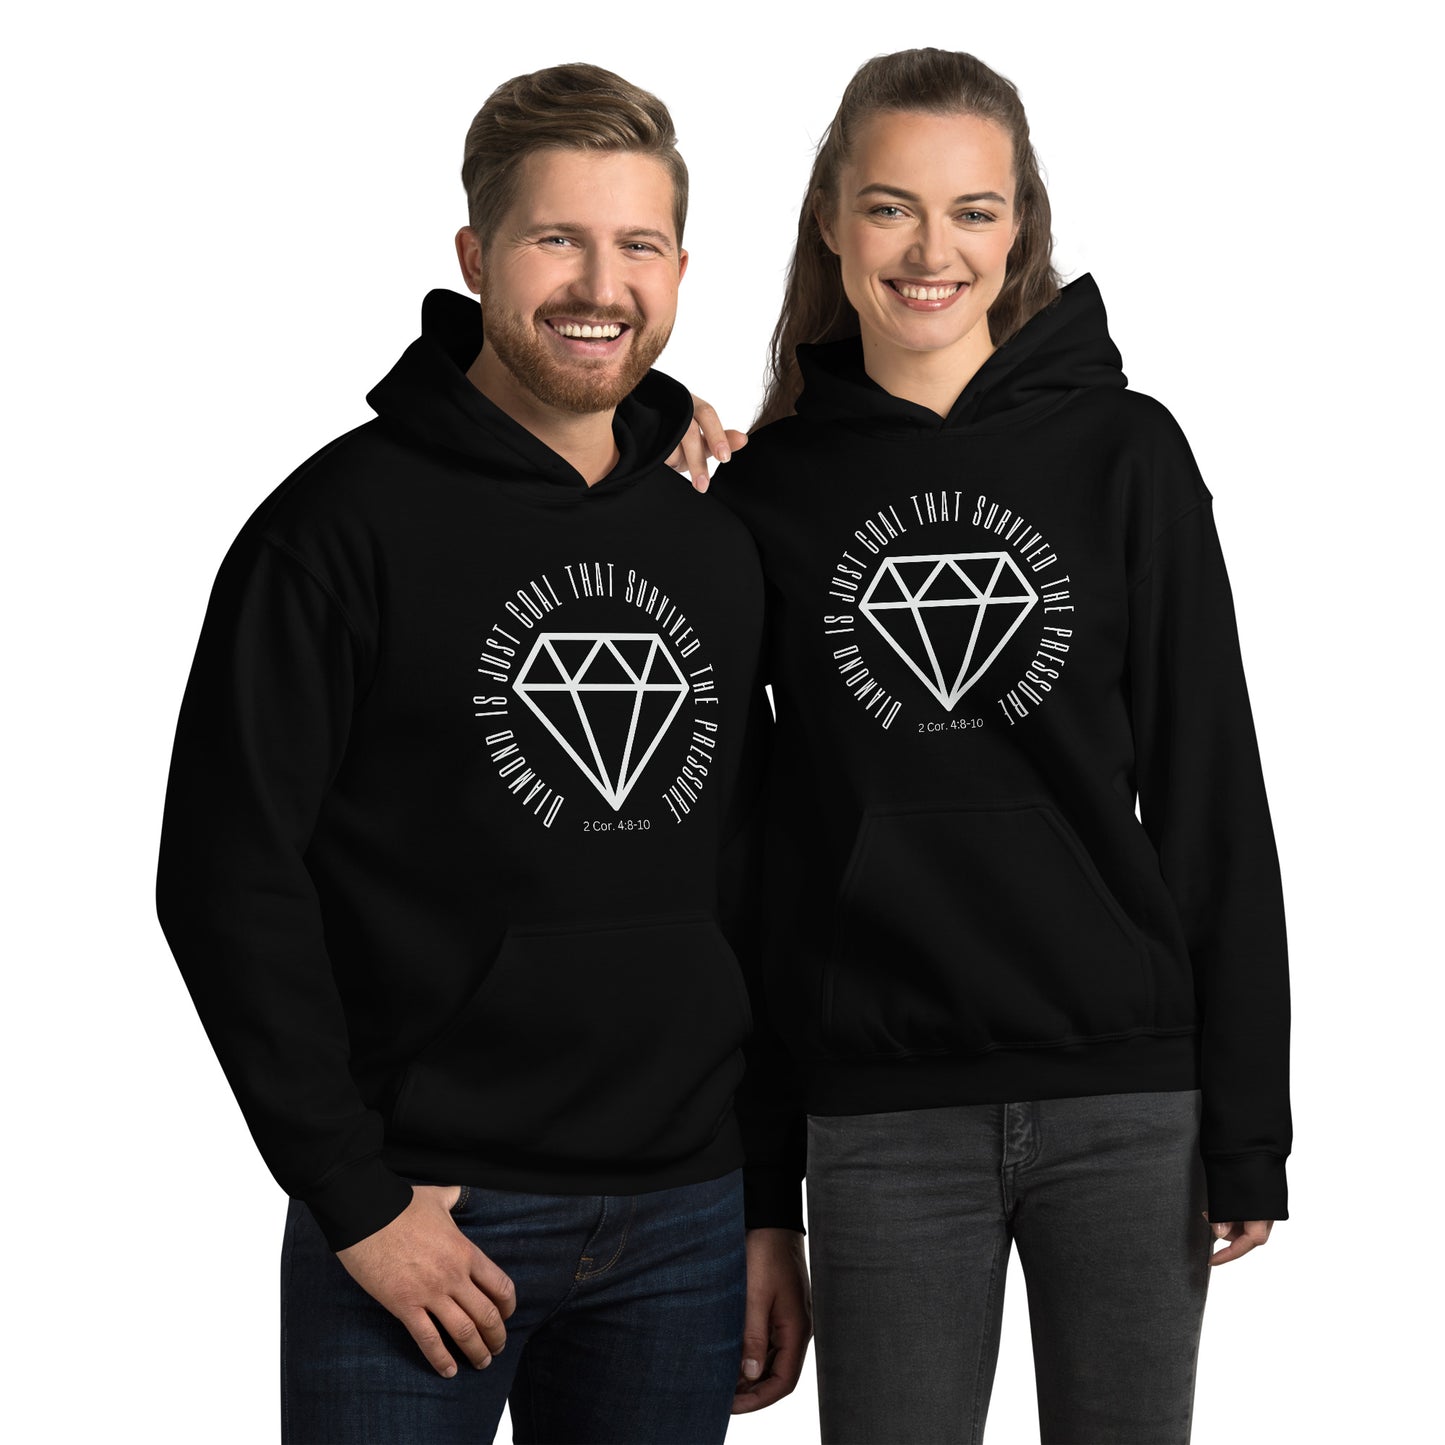 Diamond Is Just Coal That Survived The Pressure 2 Cor. 4:8-10 Unisex Hoodie